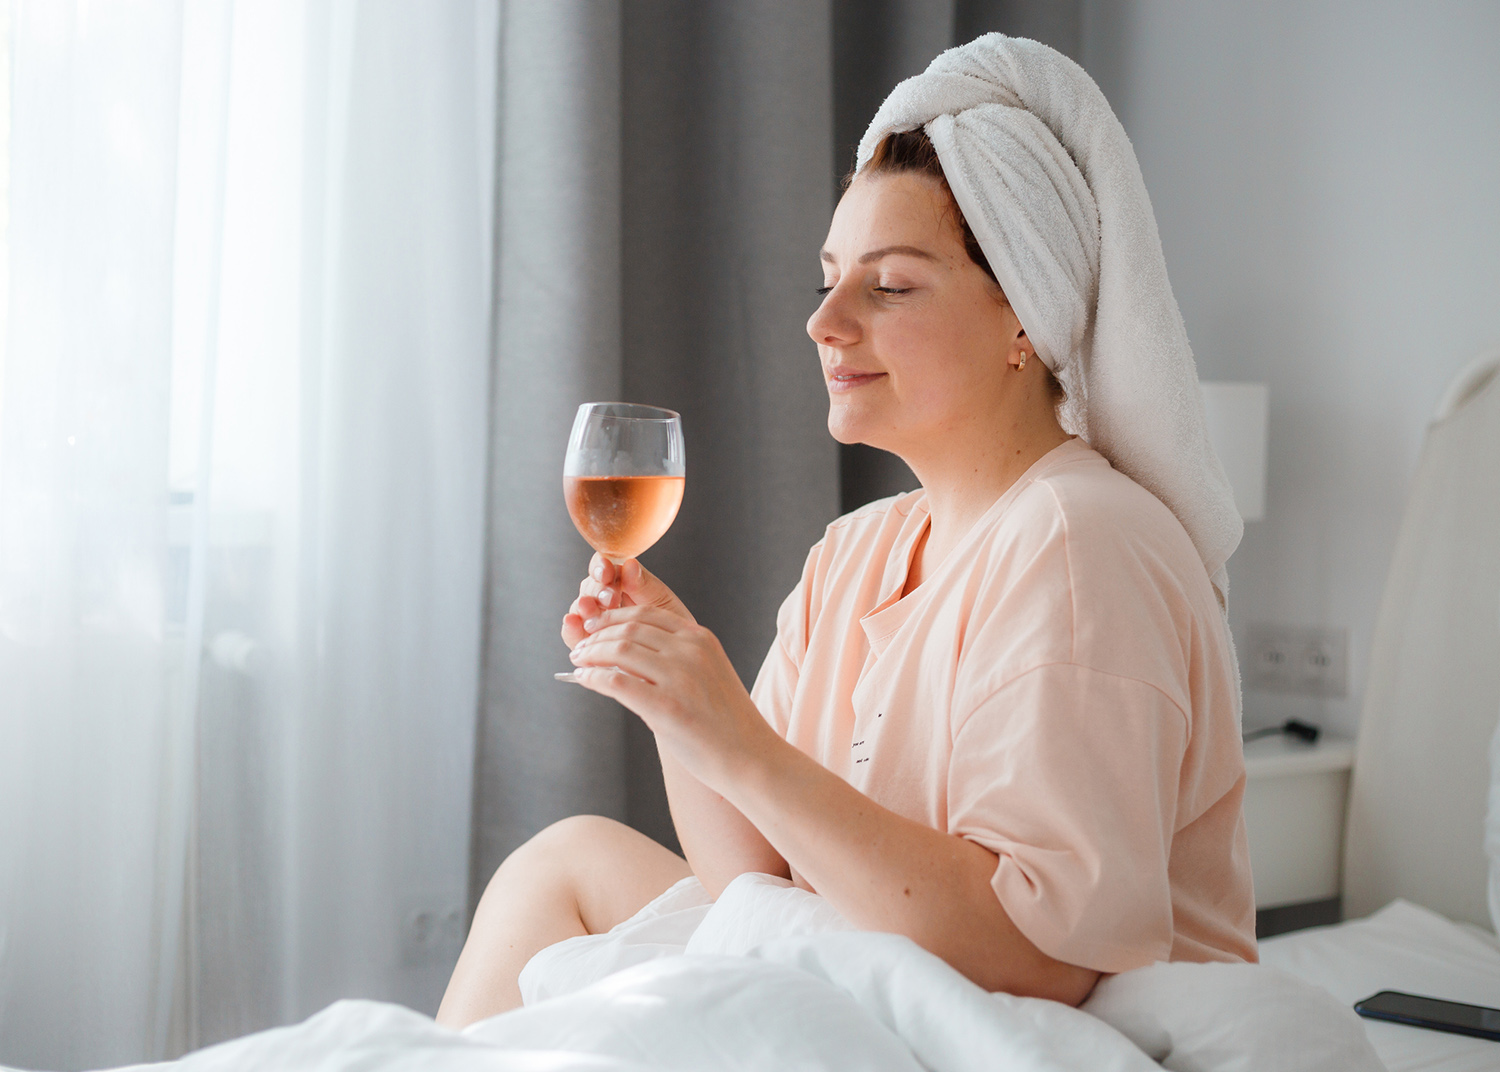 Beautiful young woman after shower with glass of wine in bedroom. Staying at home in isolation during quarantine lockdown.